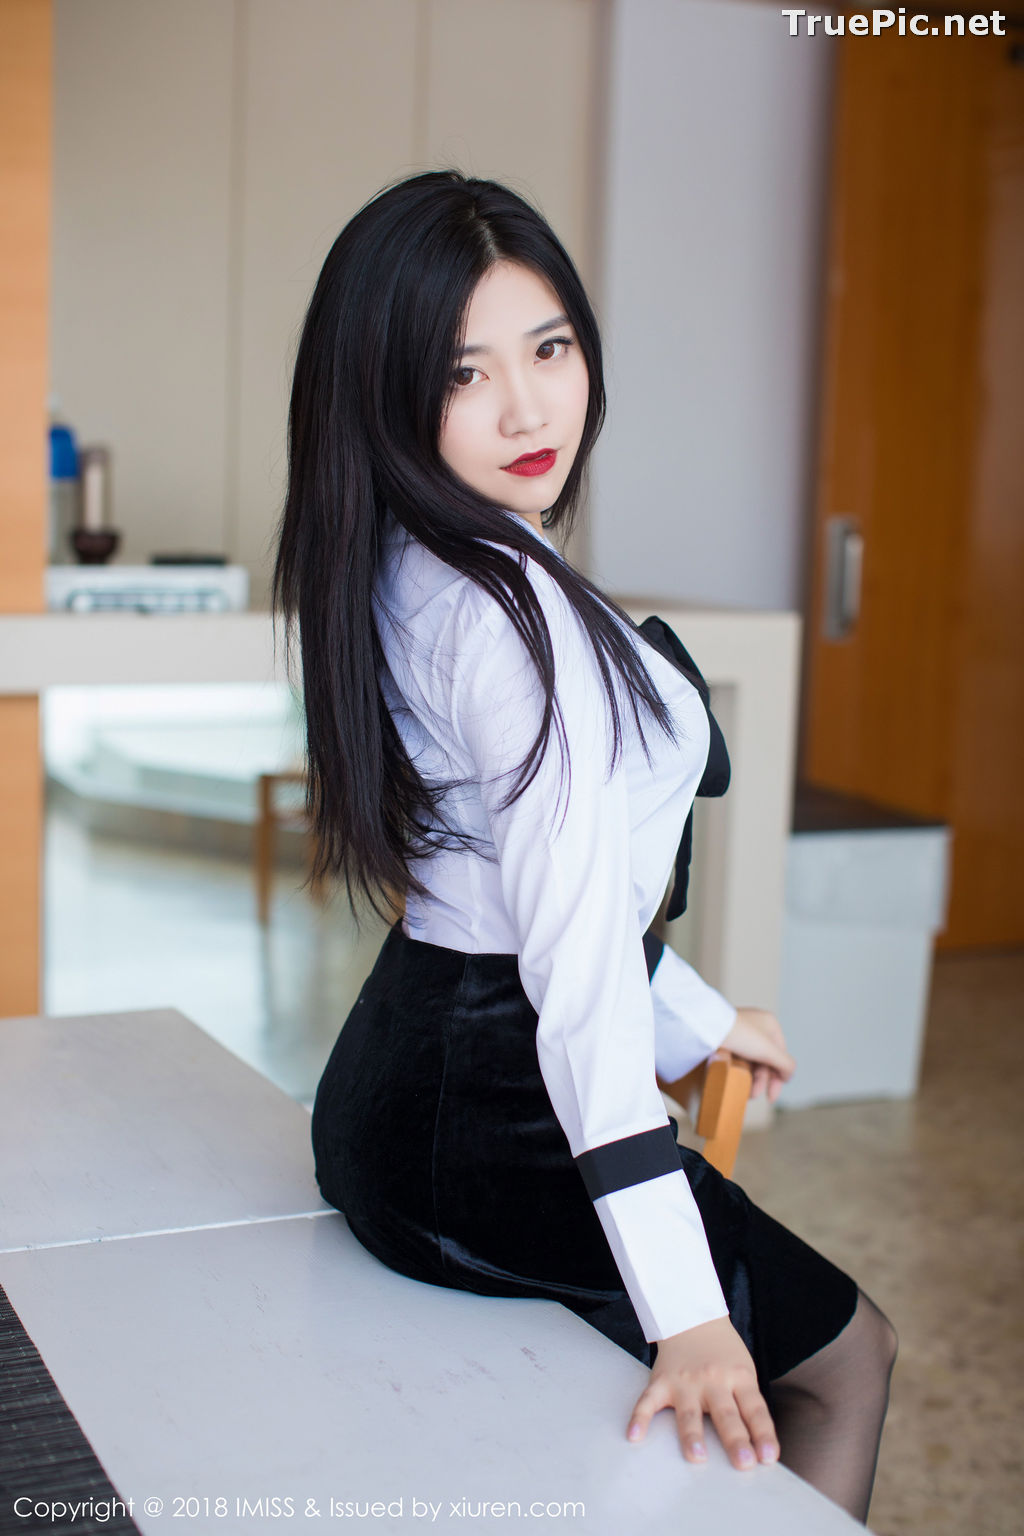 Image IMISS Vol.239 - Chinese Model - Sabrina (Xu Nuo 许诺) - Office Girl - TruePic.net - Picture-15